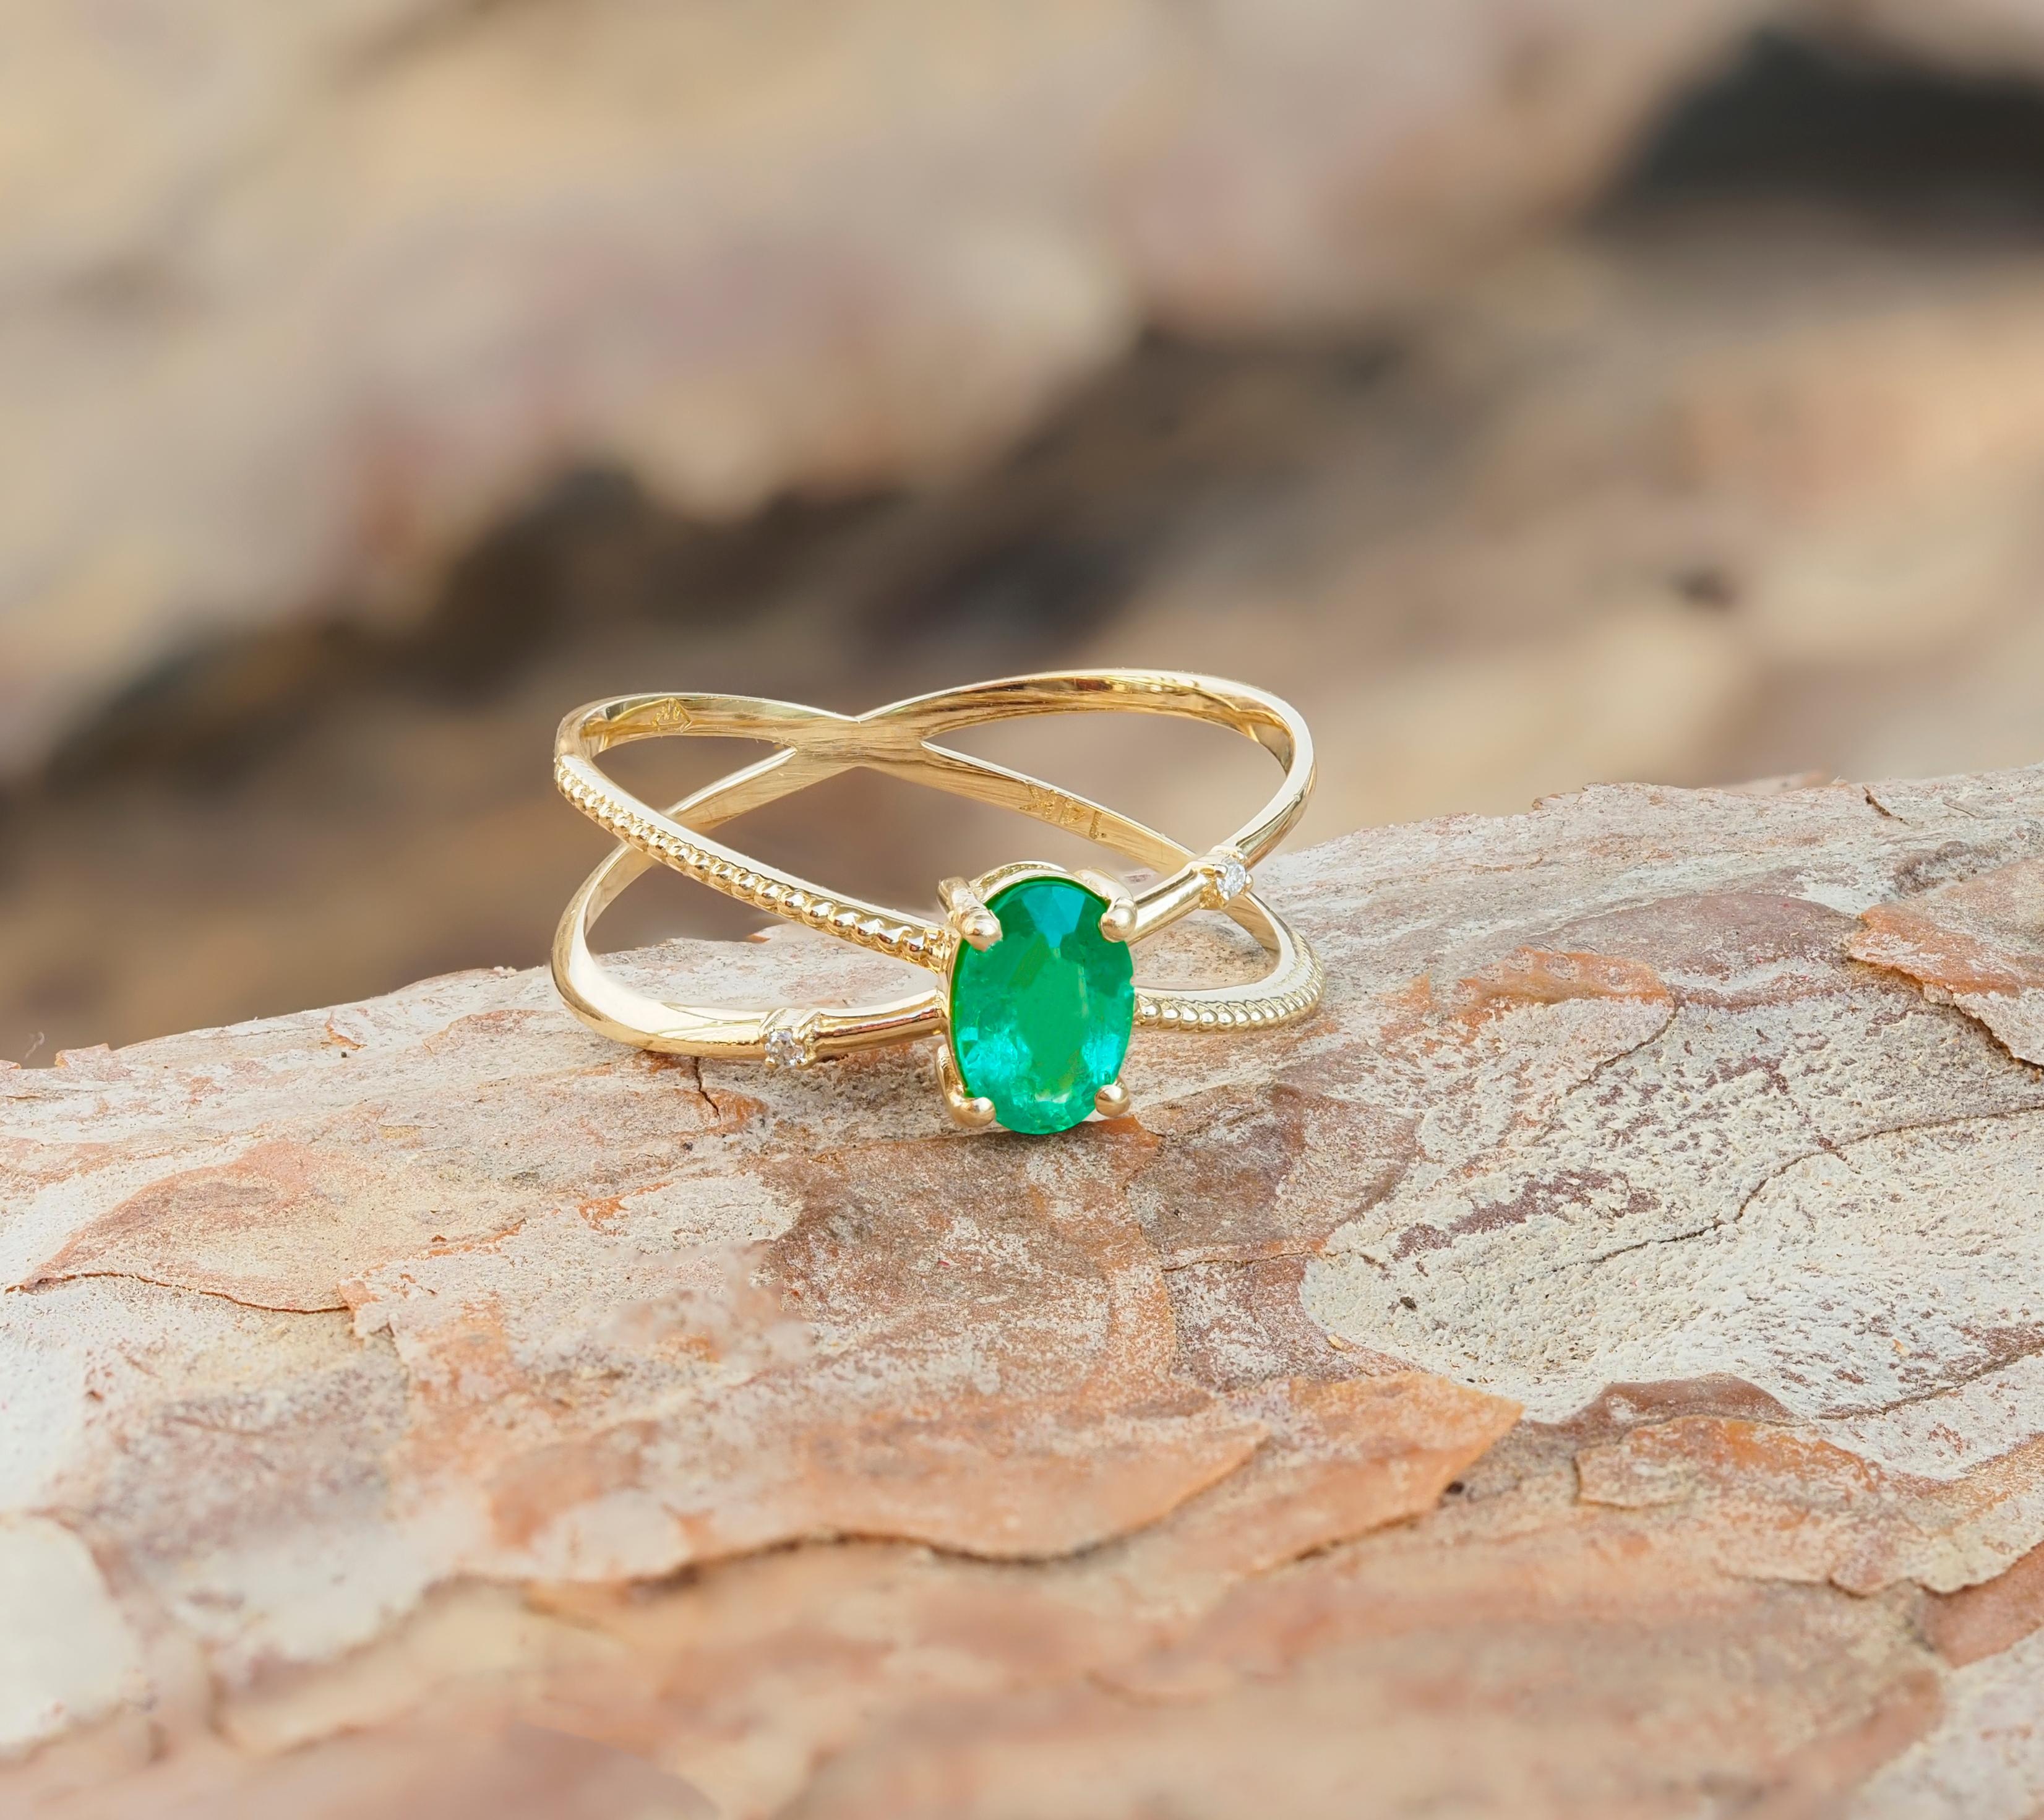 For Sale:  Emerald and diamonds 14k gold ring! 4